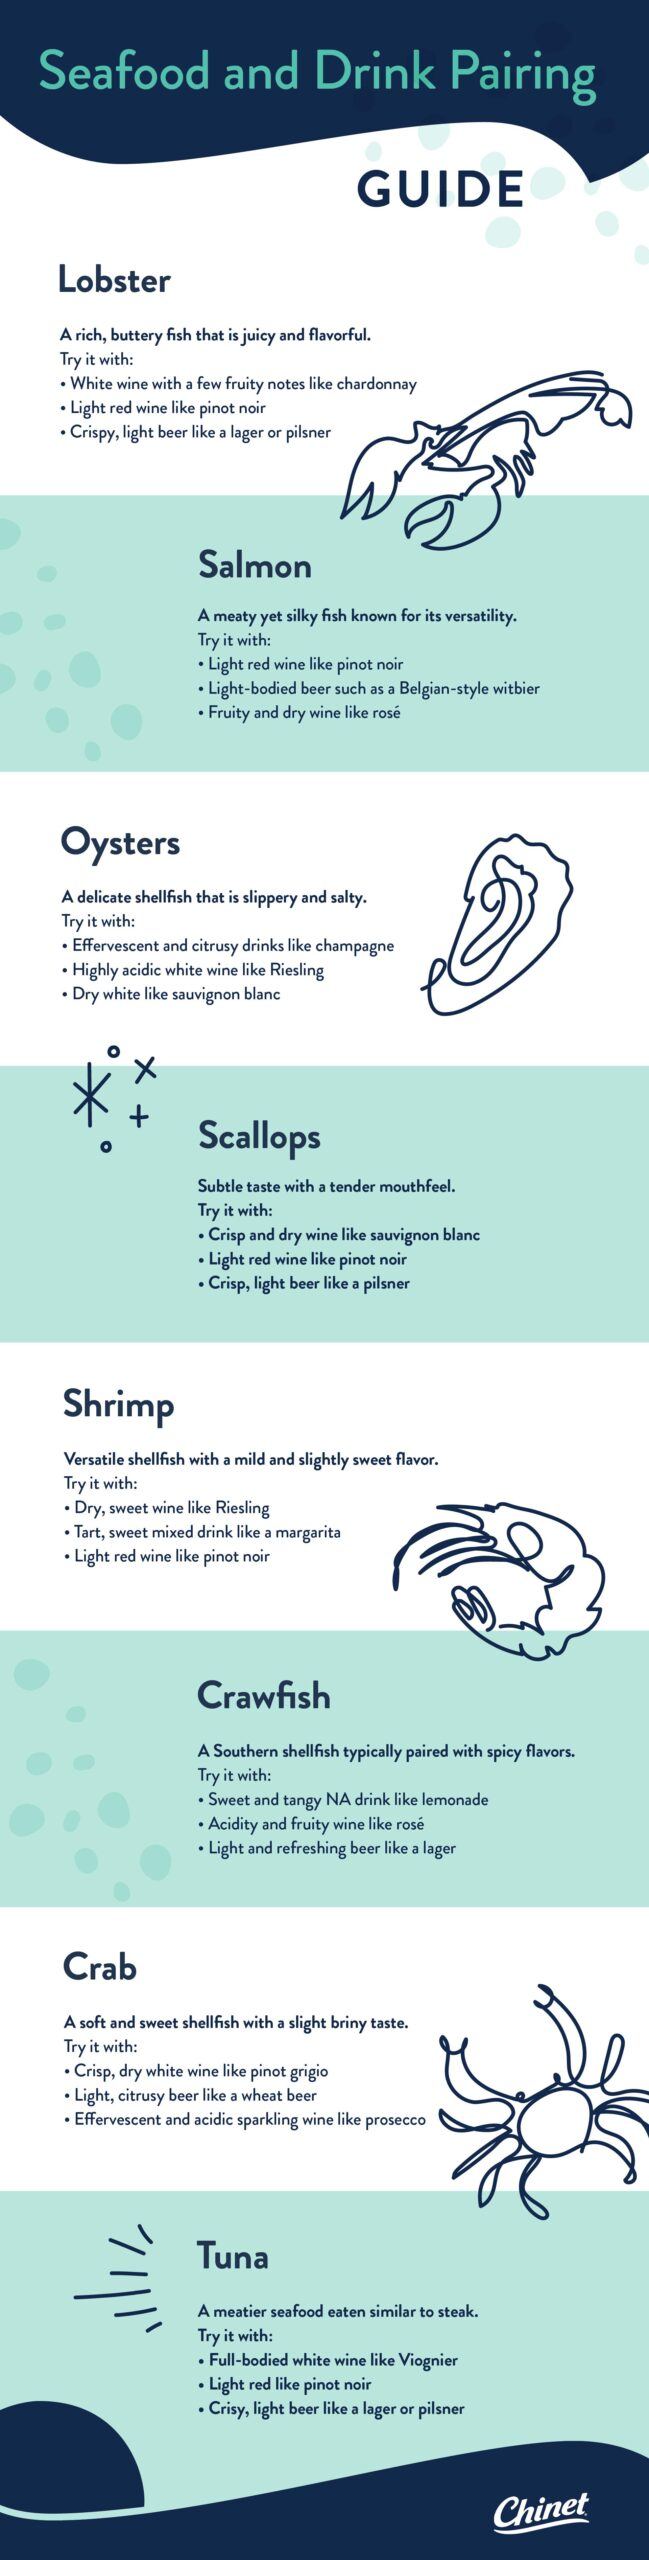 Seafood and drink pairing guide